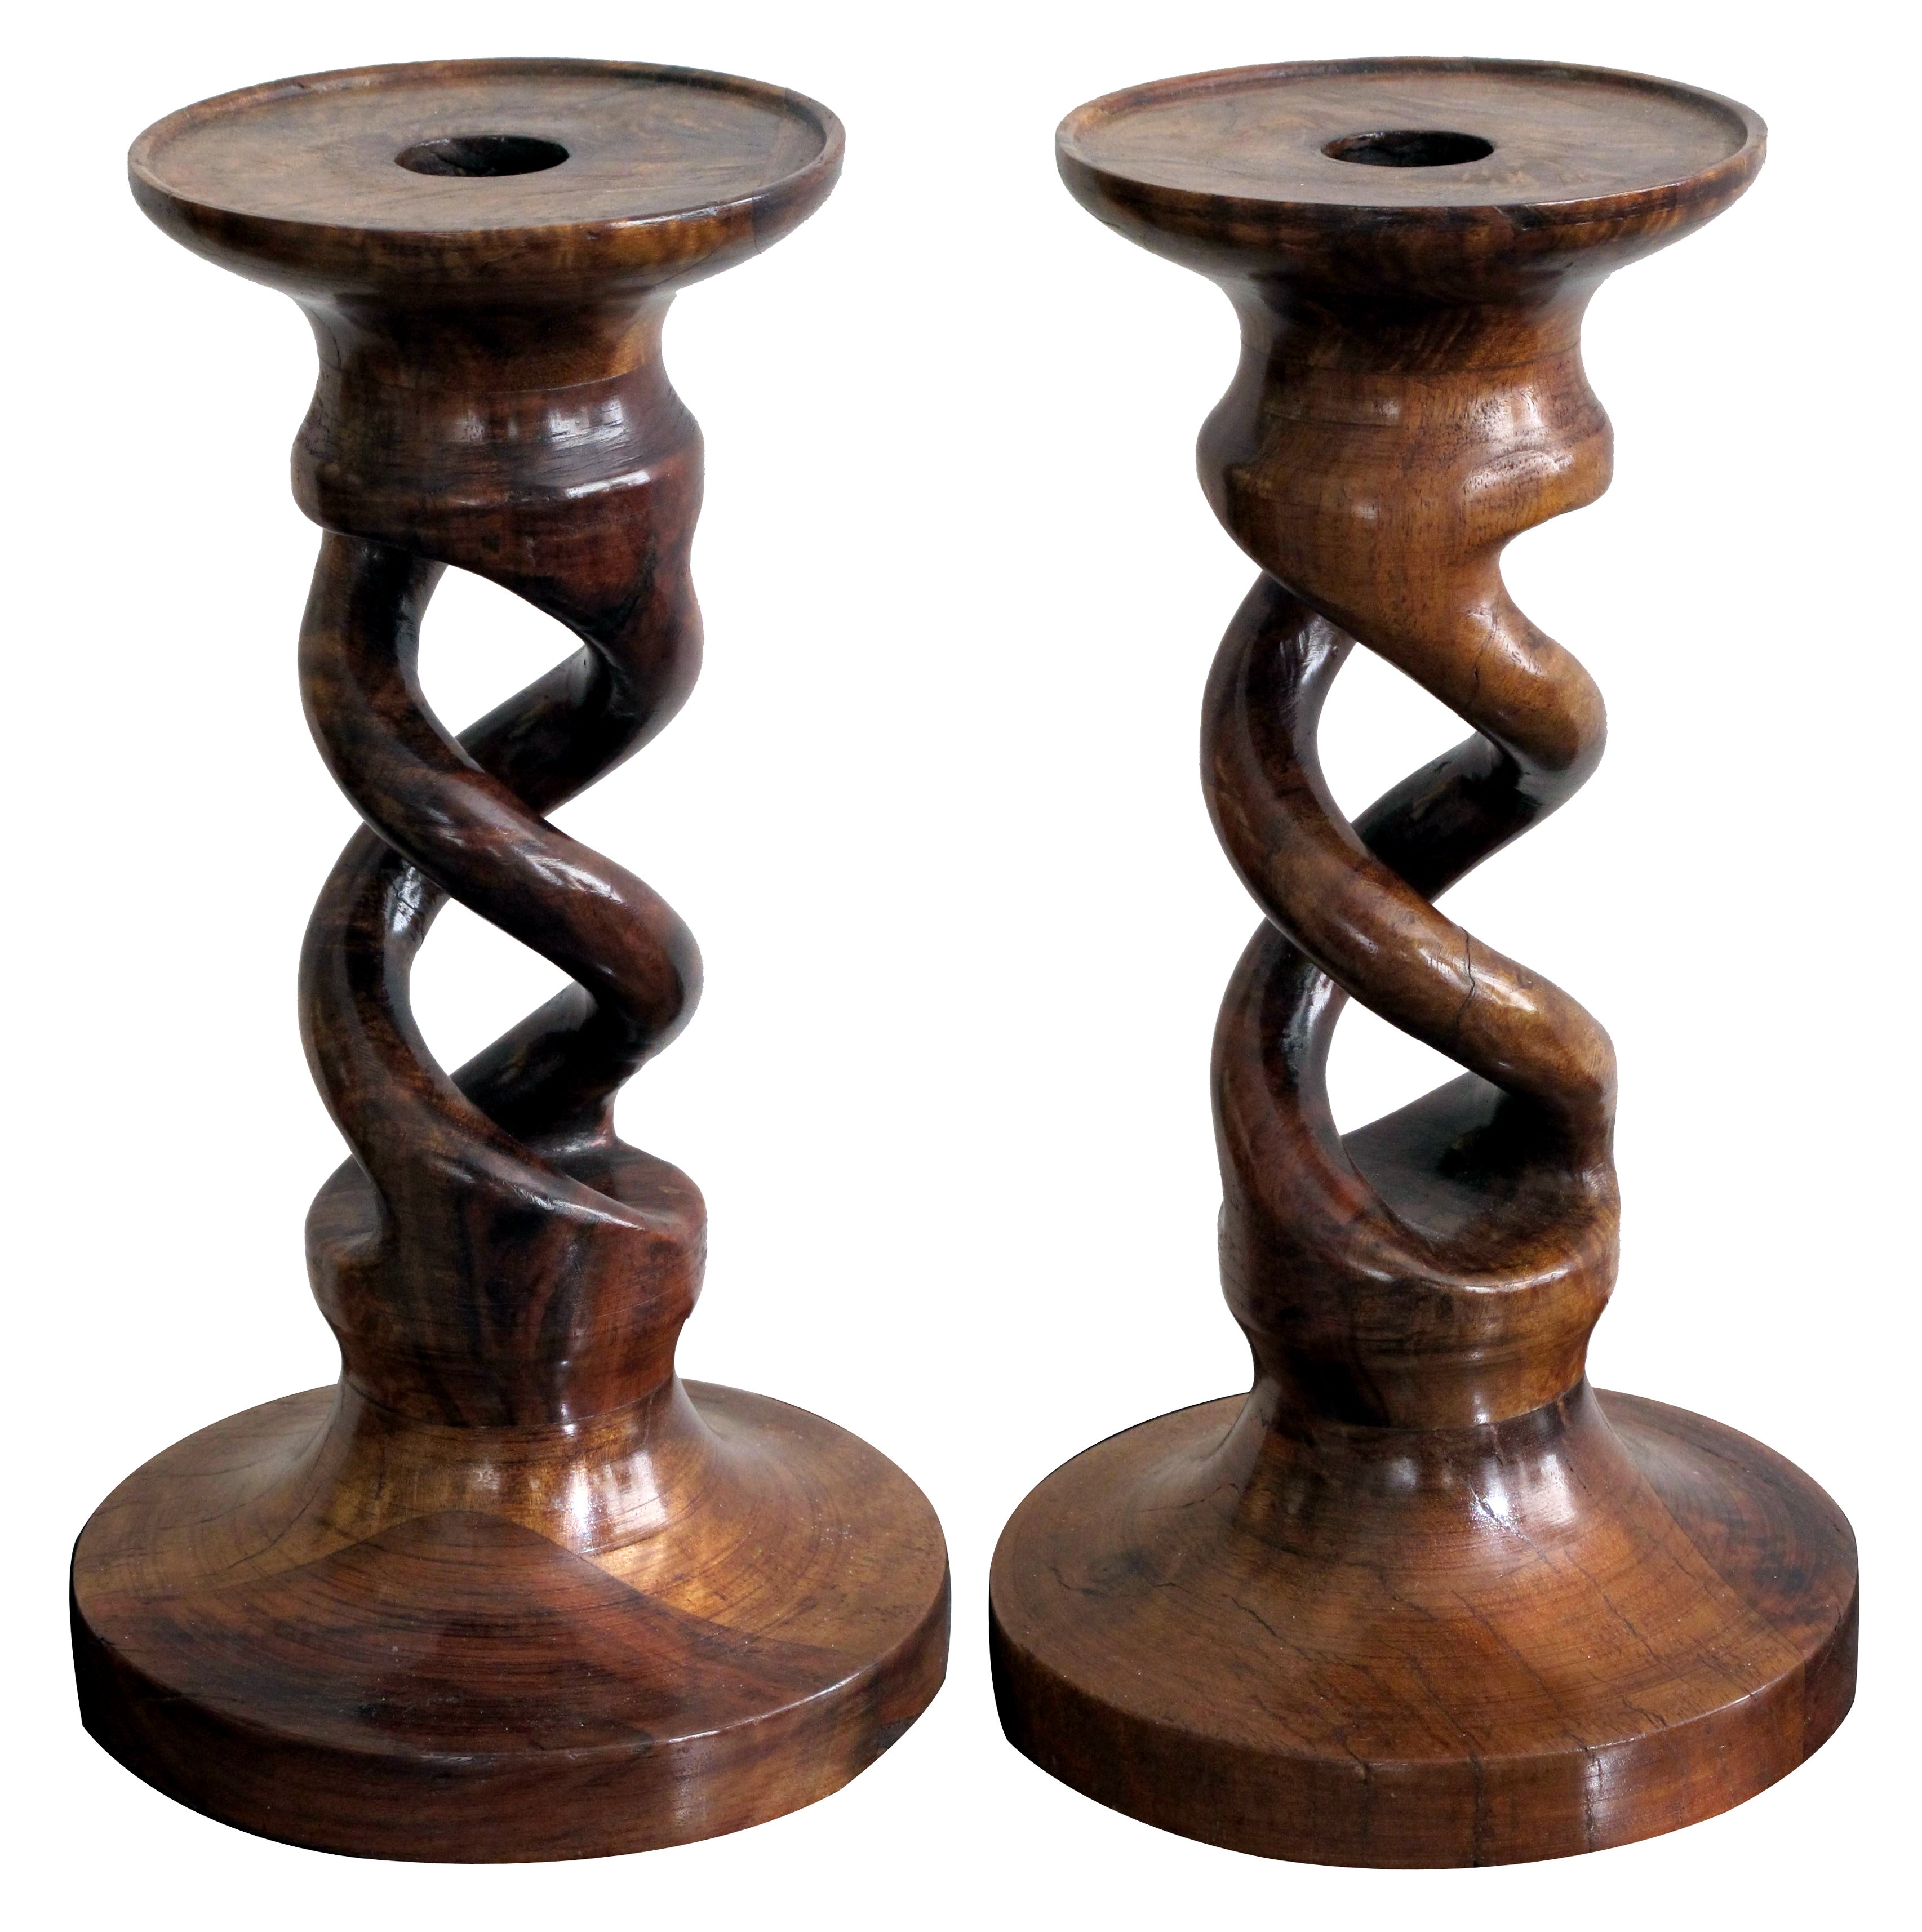 A Well-Carved Pair of English Treenware Barley Twist Candlesticks